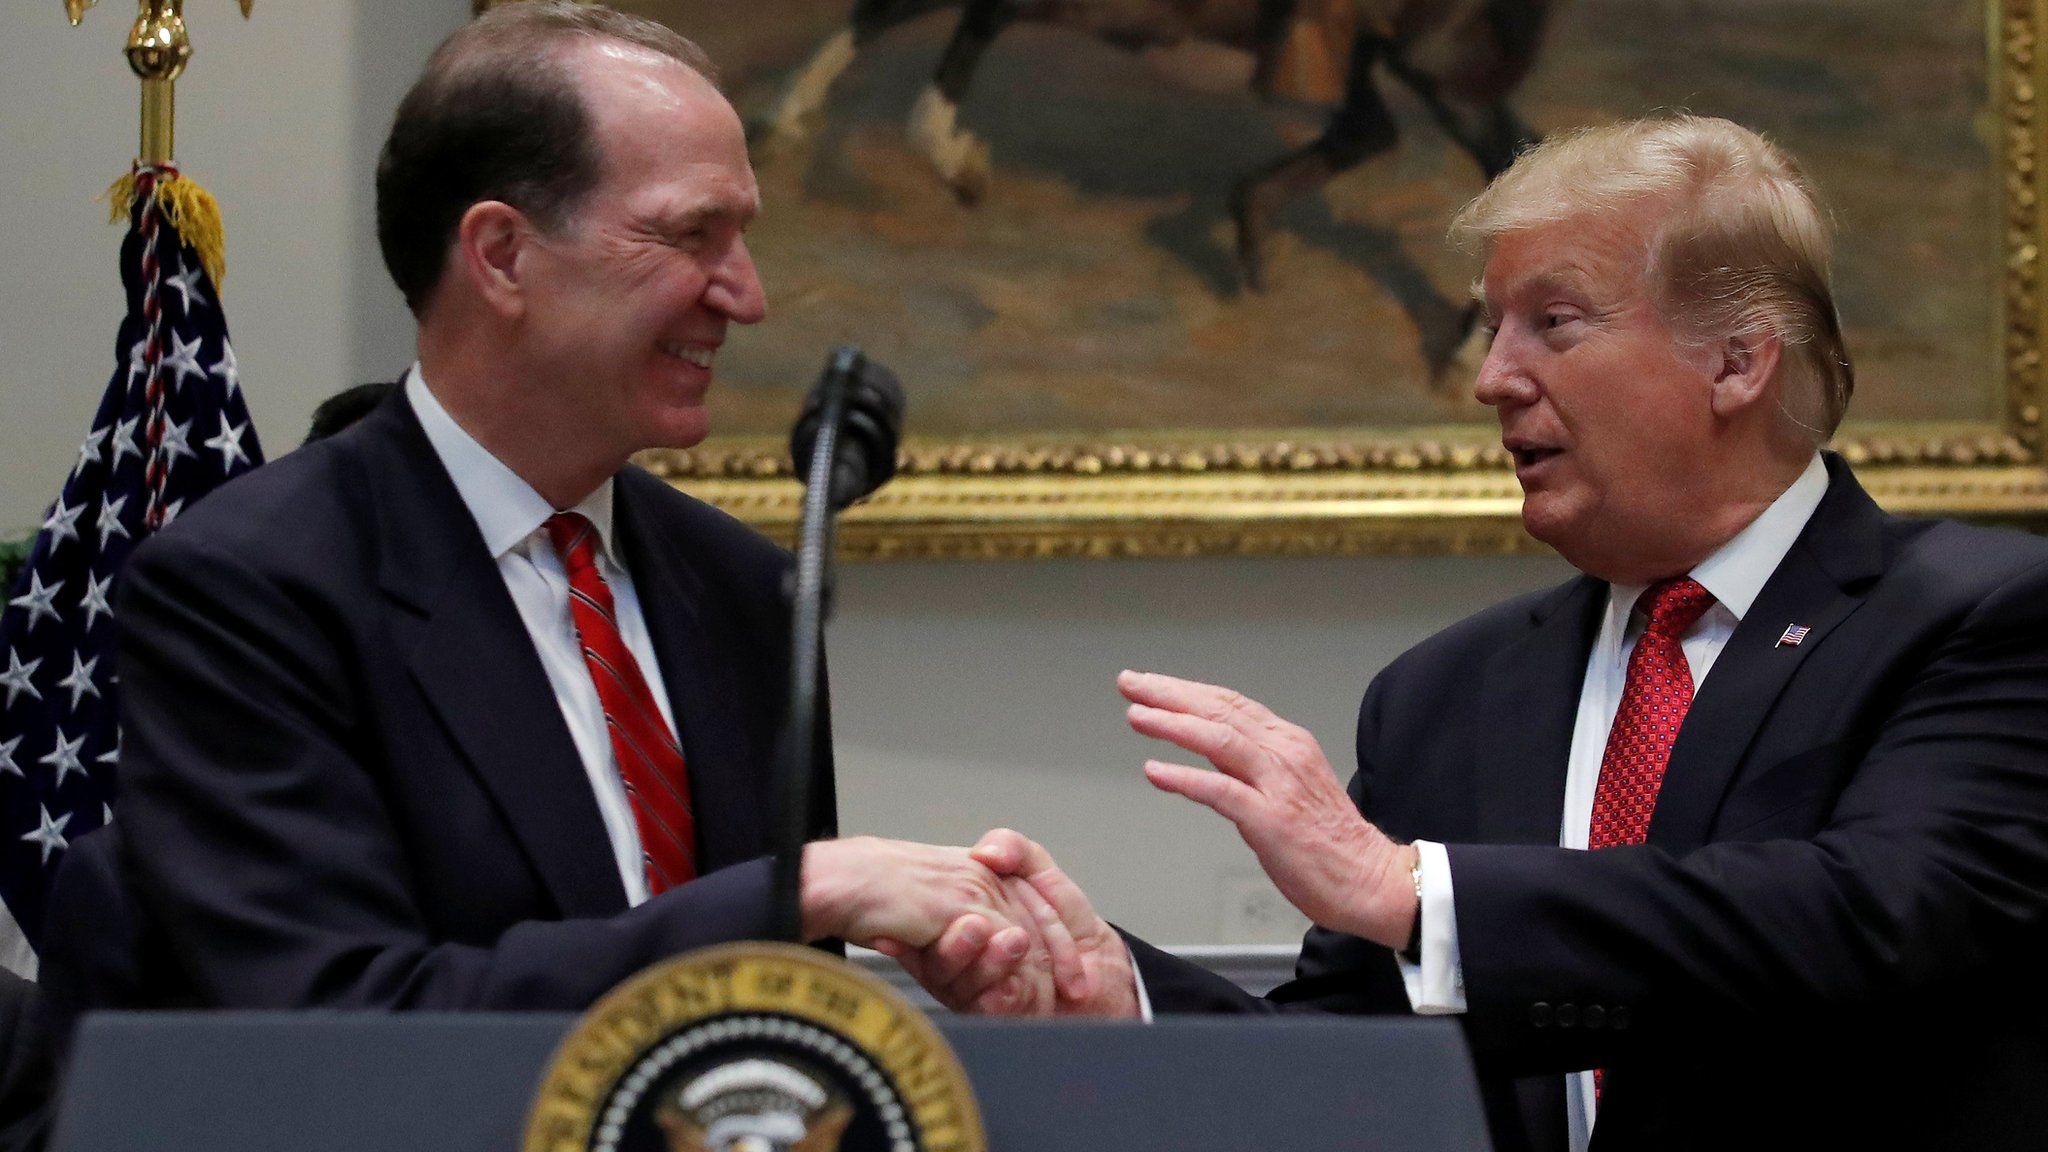 U.S. President Donald Trump introduces the U.S. candidate in election for the next President of the World Bank David Malpass at the White House in Washington, U.S., February 6, 2019.